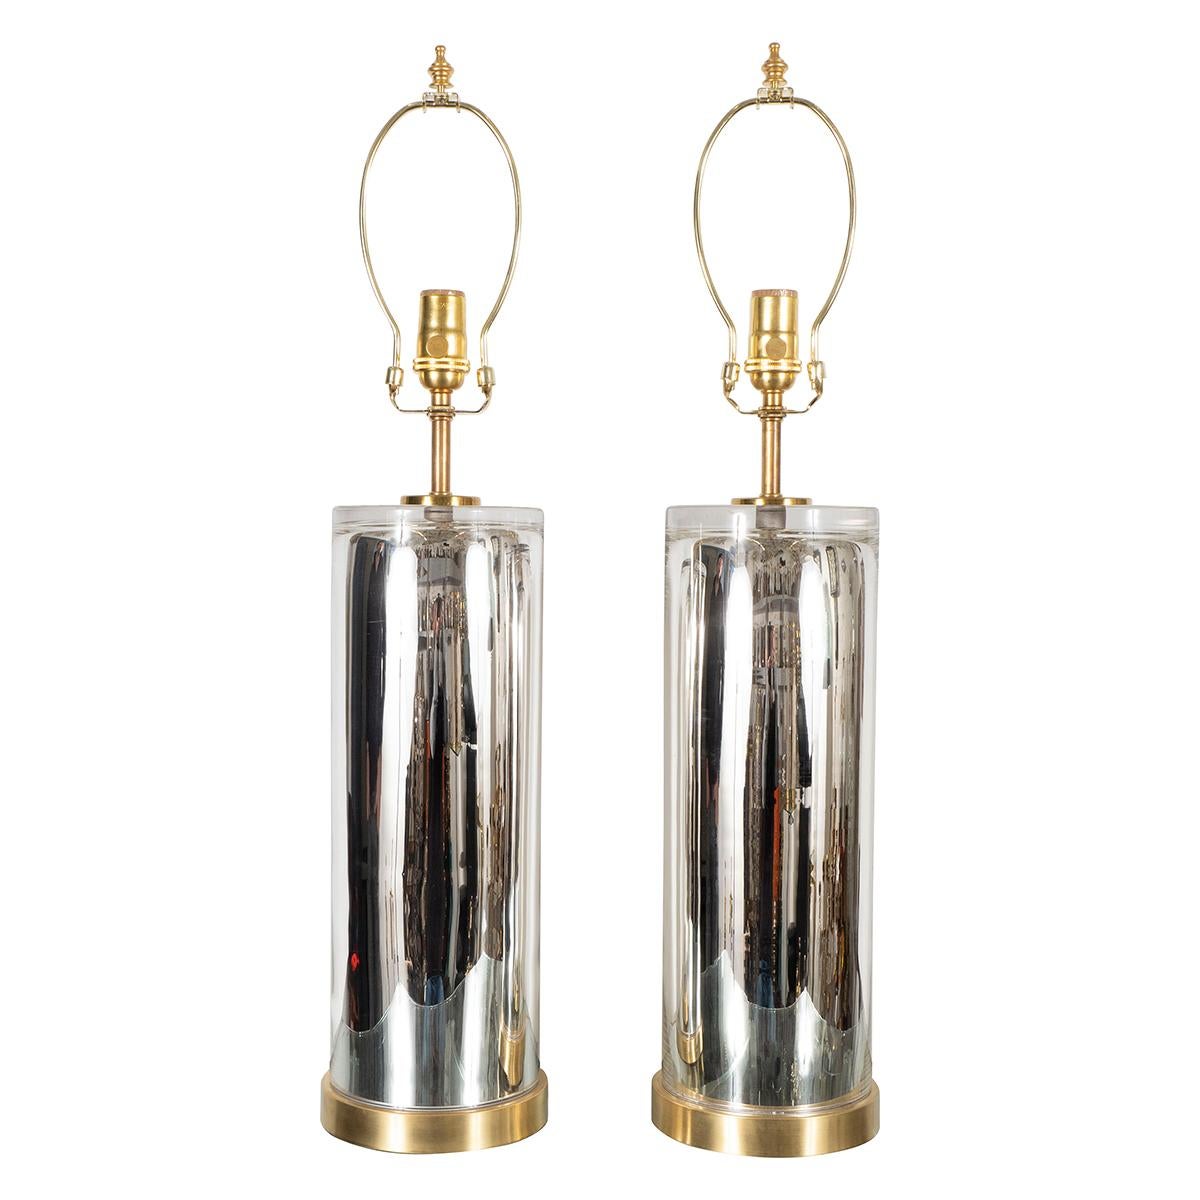 Pair of cylindrical mercury glass table lamps with brass hardware.